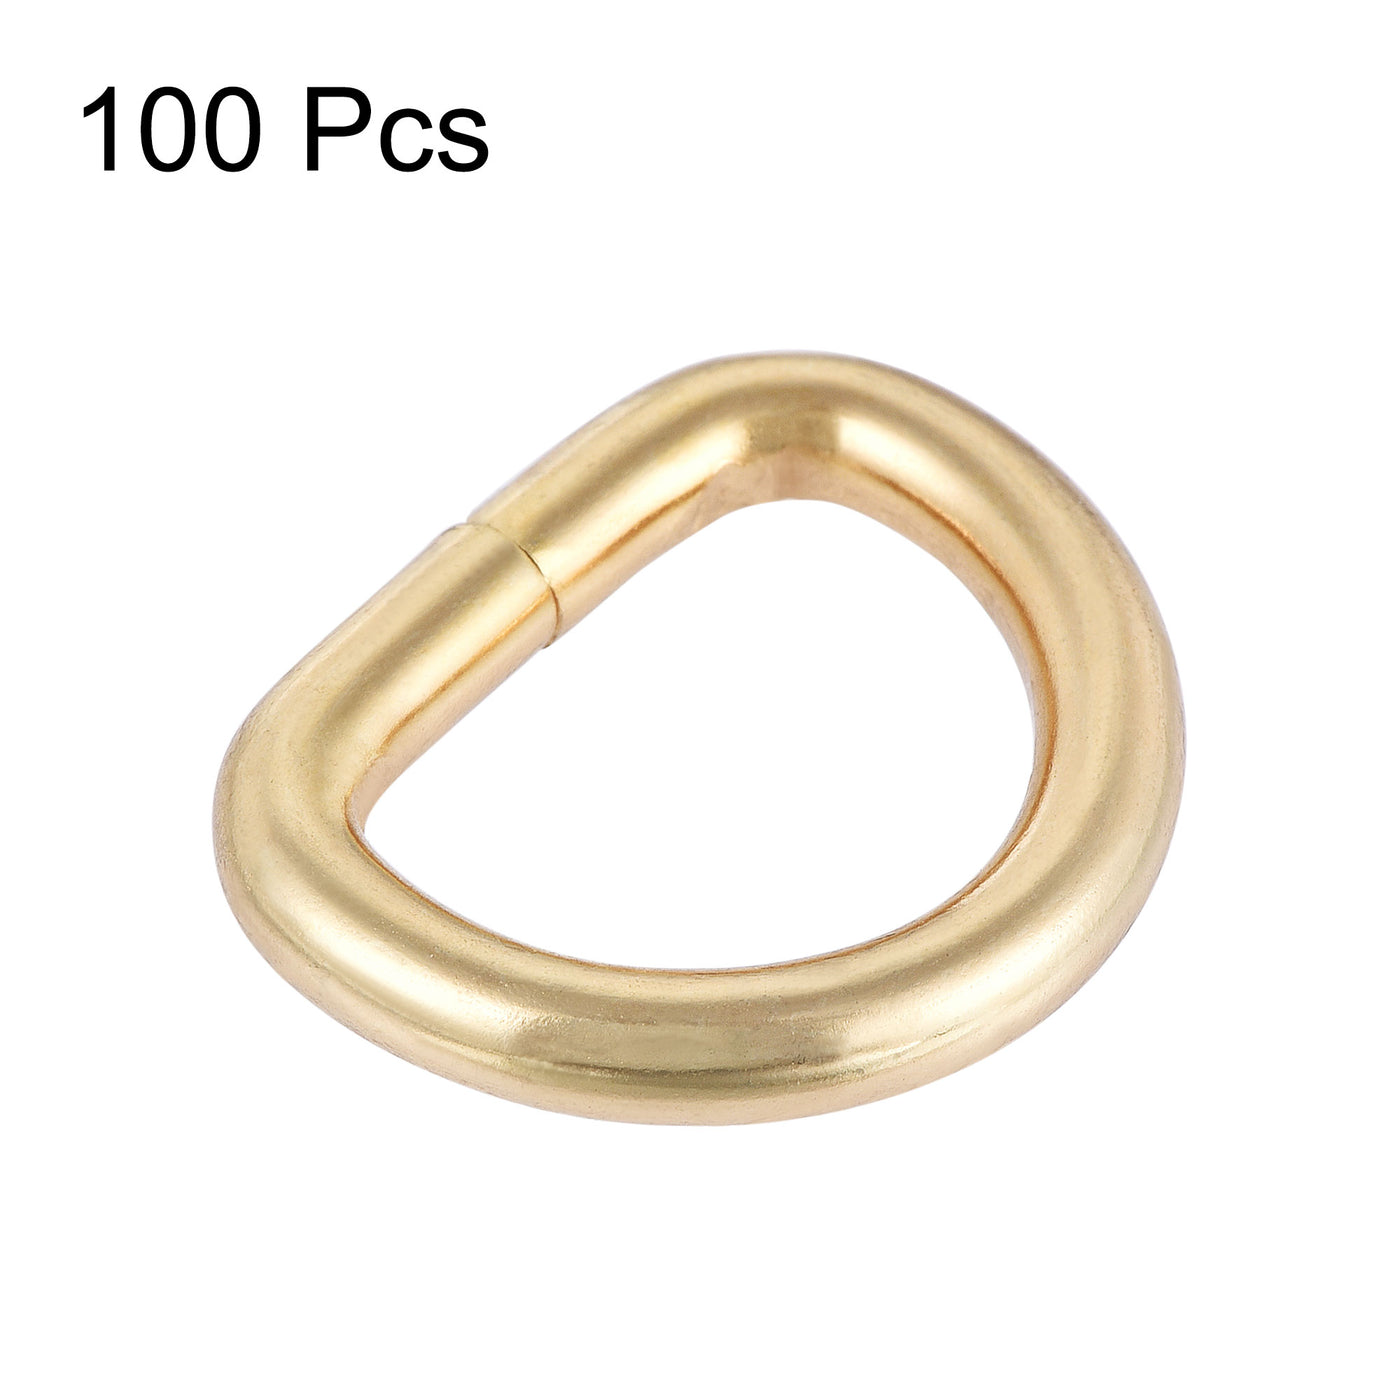 uxcell Uxcell Metal D Ring 0.63"(16mm) D-Rings Buckle for Hardware Bags Belts Craft DIY Accessories Gold Tone 100pcs